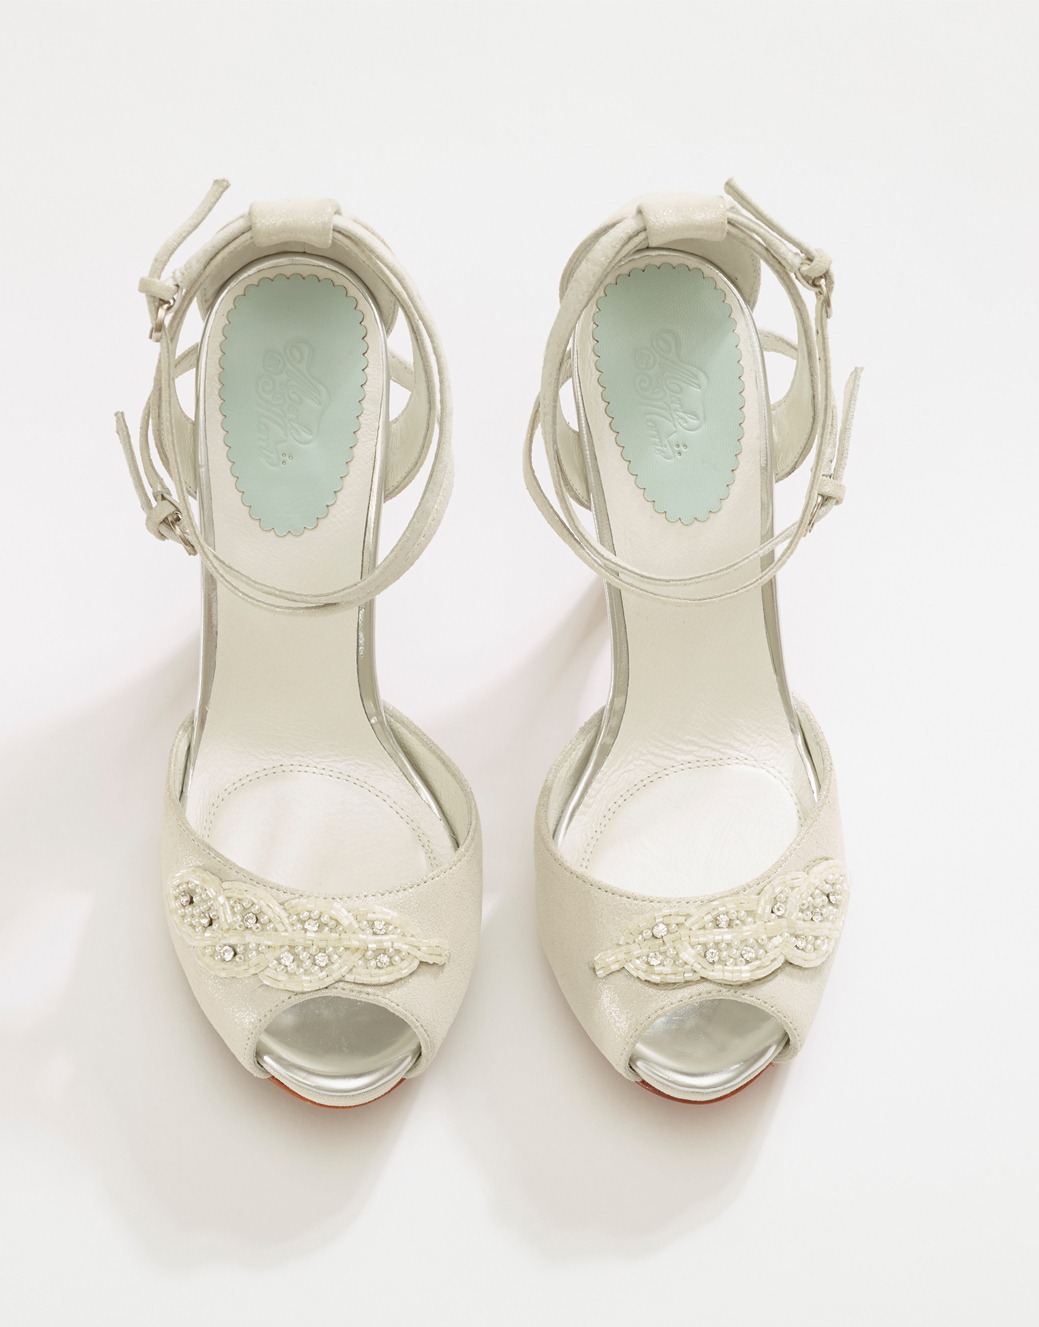 Beautiful Bridal Shoes from Merle & Morris - Myrtle